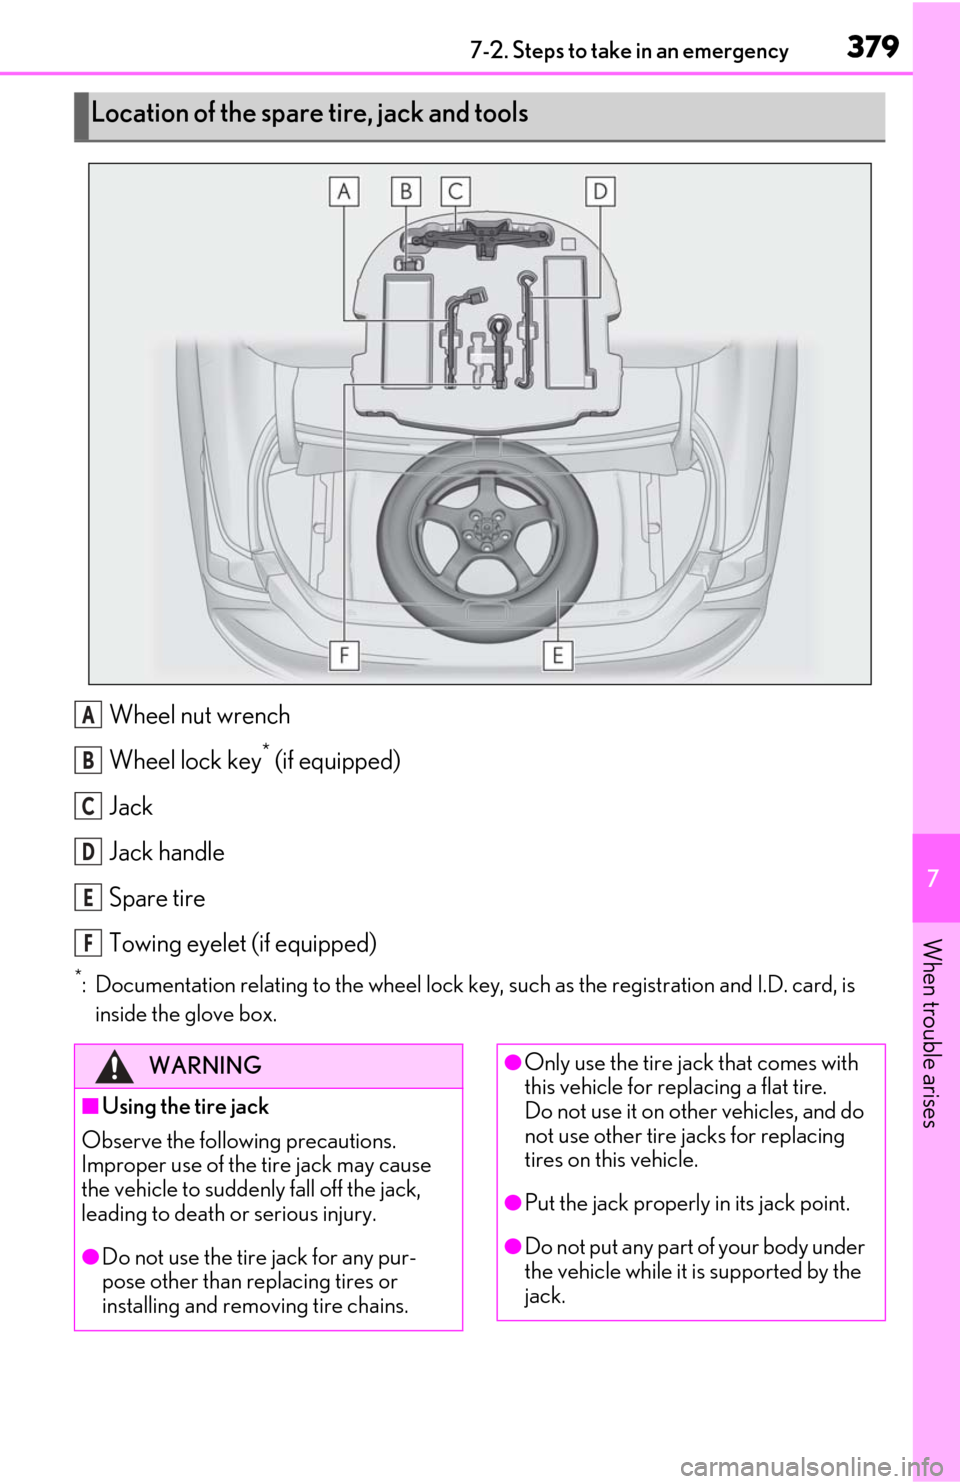 Lexus ES300h 2020   (OM06196U) Owners Guide 3797-2. Steps to take in an emergency
7
When trouble arises
Wheel nut wrench
Wheel lock key
* (if equipped)
Jack
Jack handle
Spare tire
Towing eyelet (if equipped)
*: Documentation relating to the whe